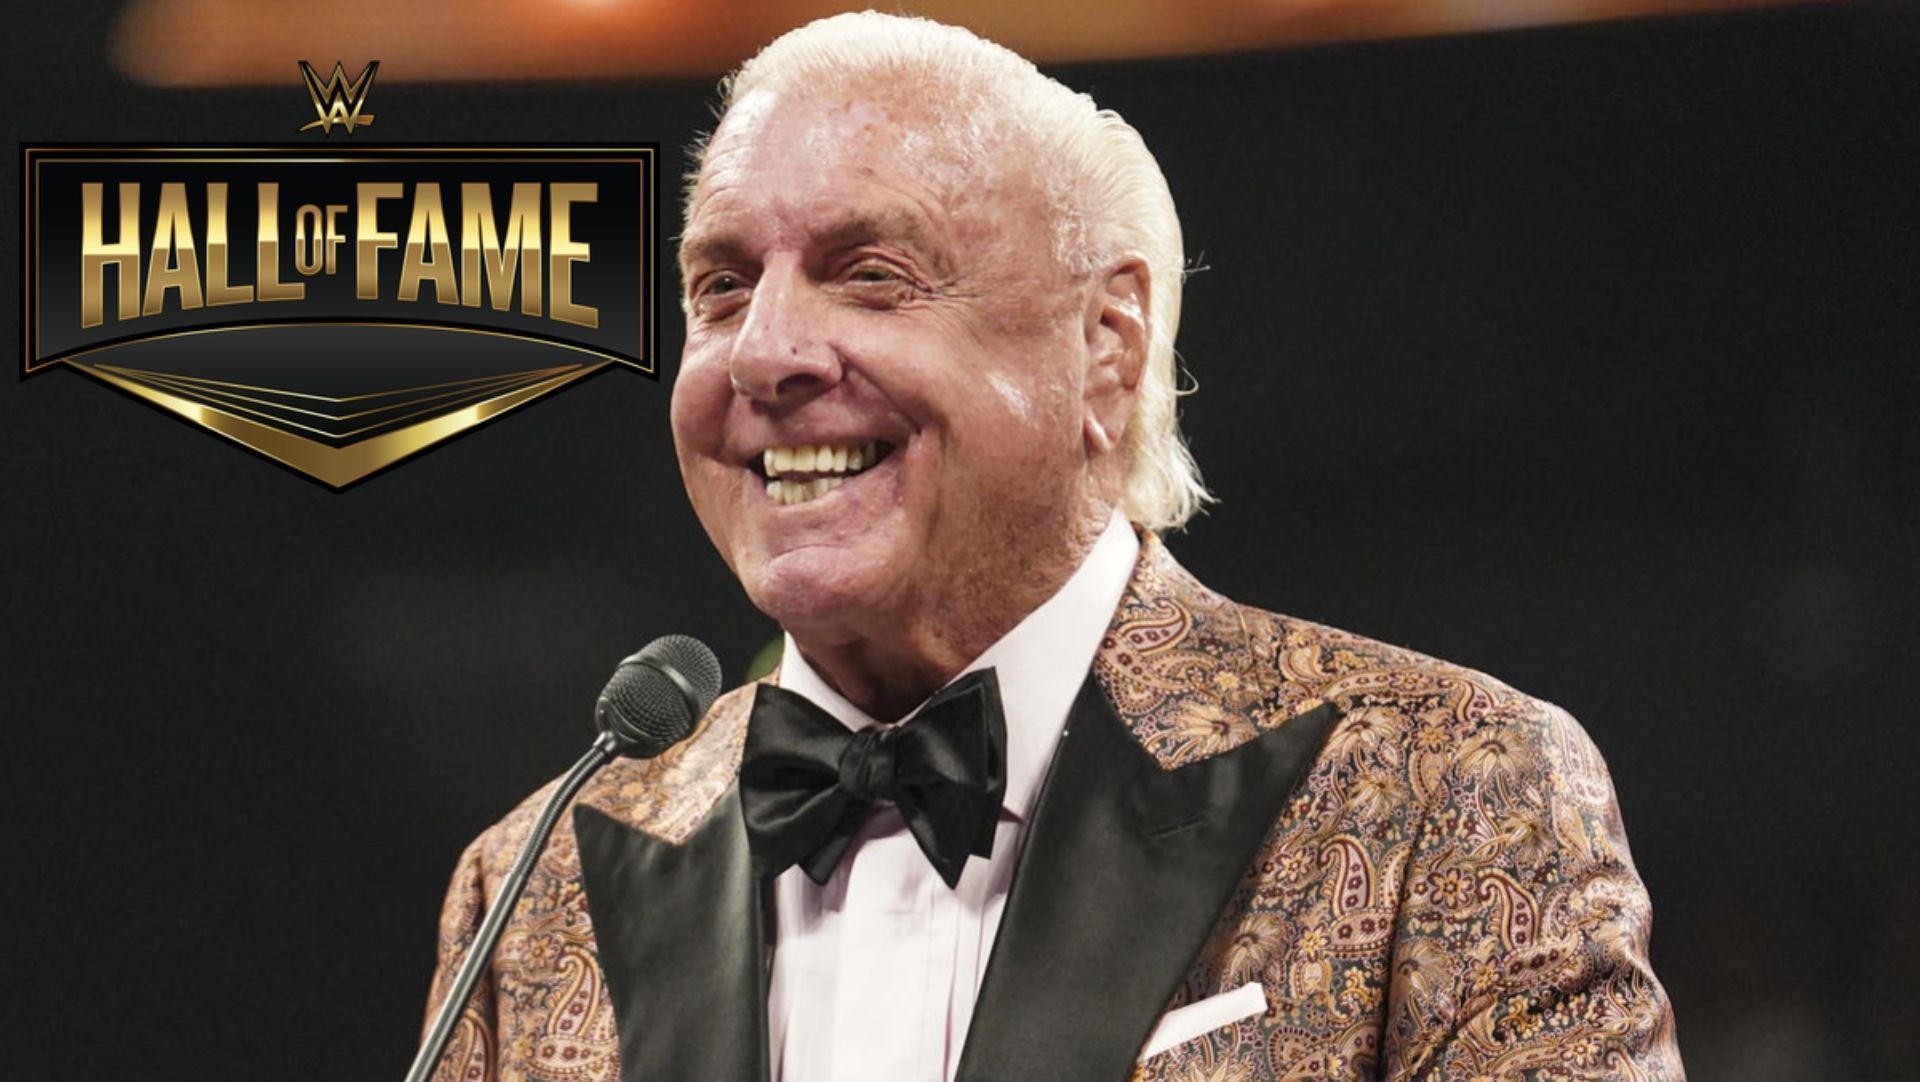 Ric Flair inducted The Great Muta into the WWE Hall of Fame